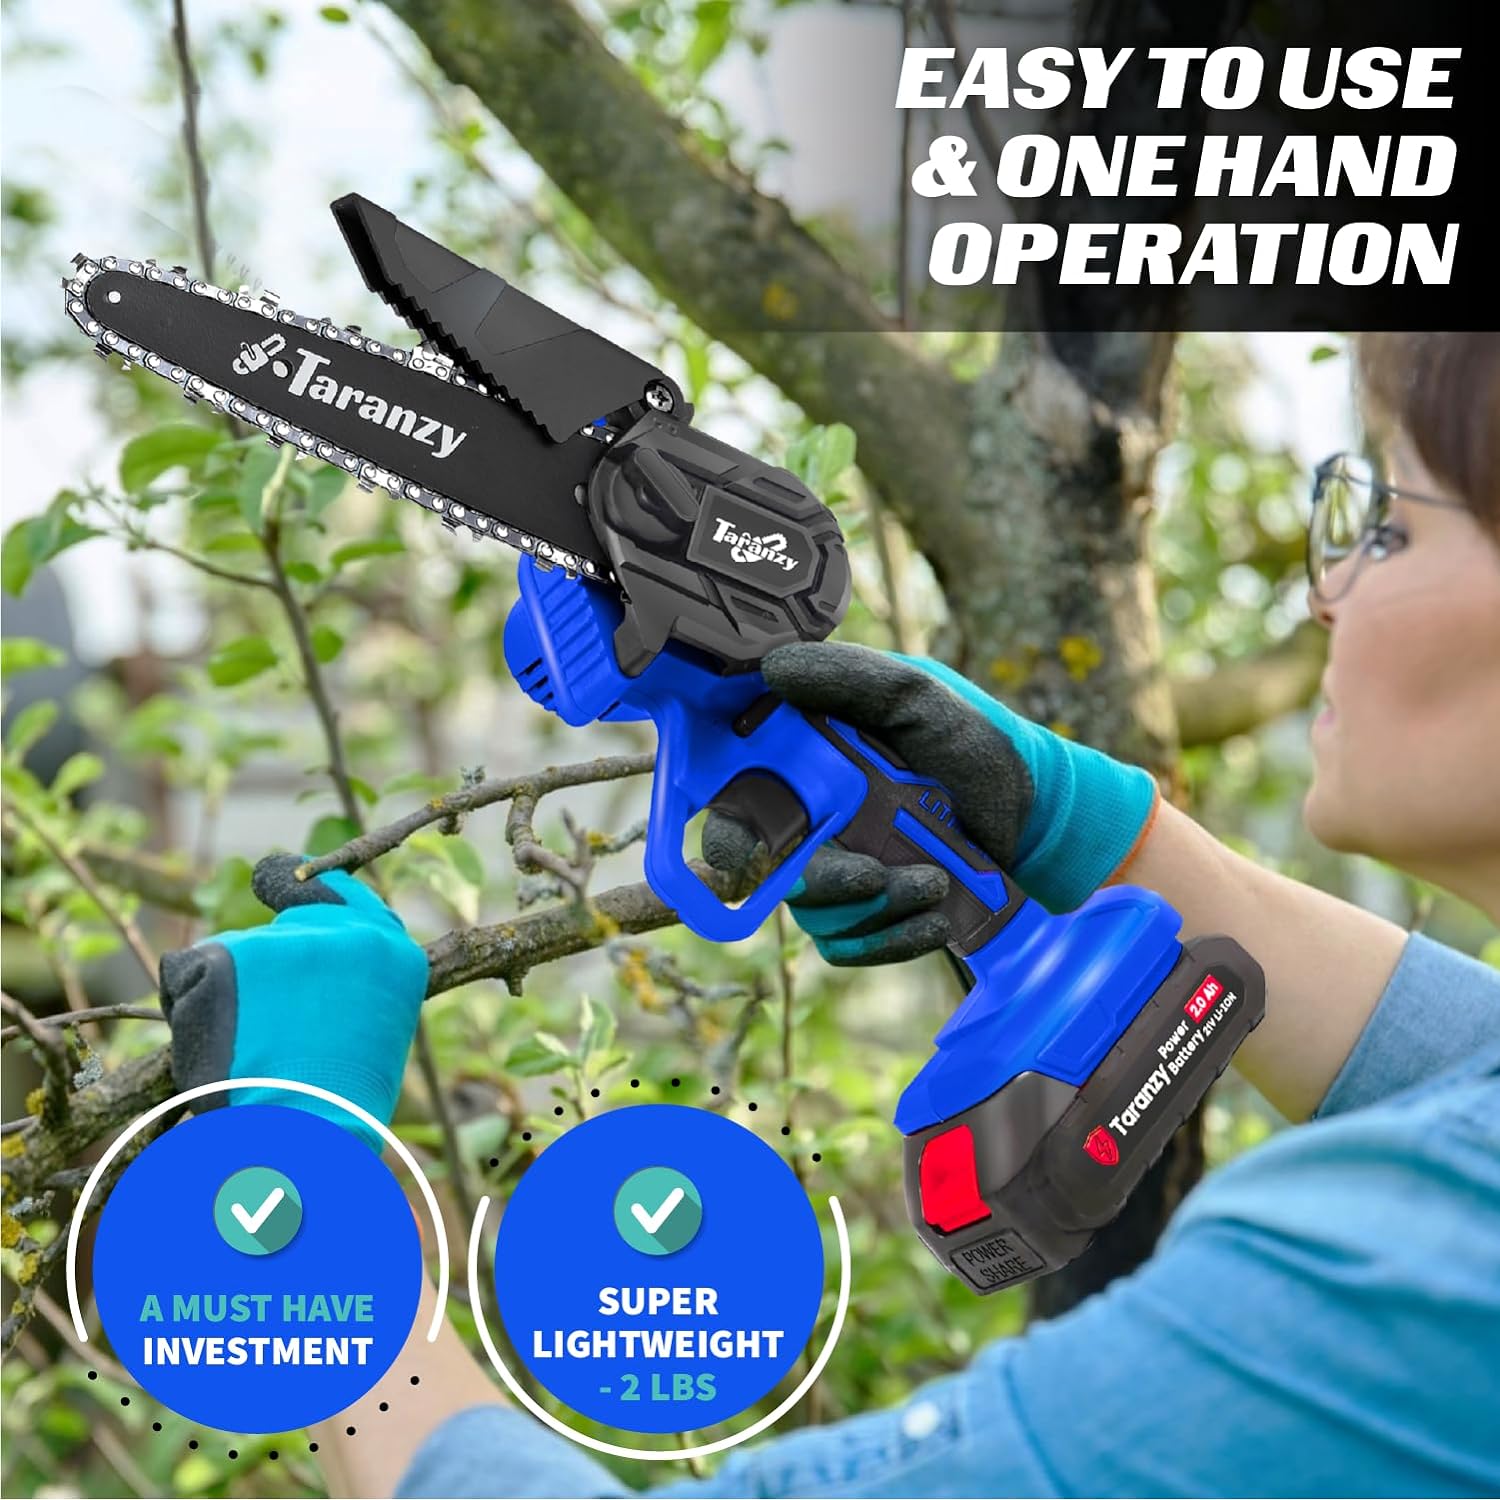 Cyber Monday Sales on Mini Chainsaw 6 Inch